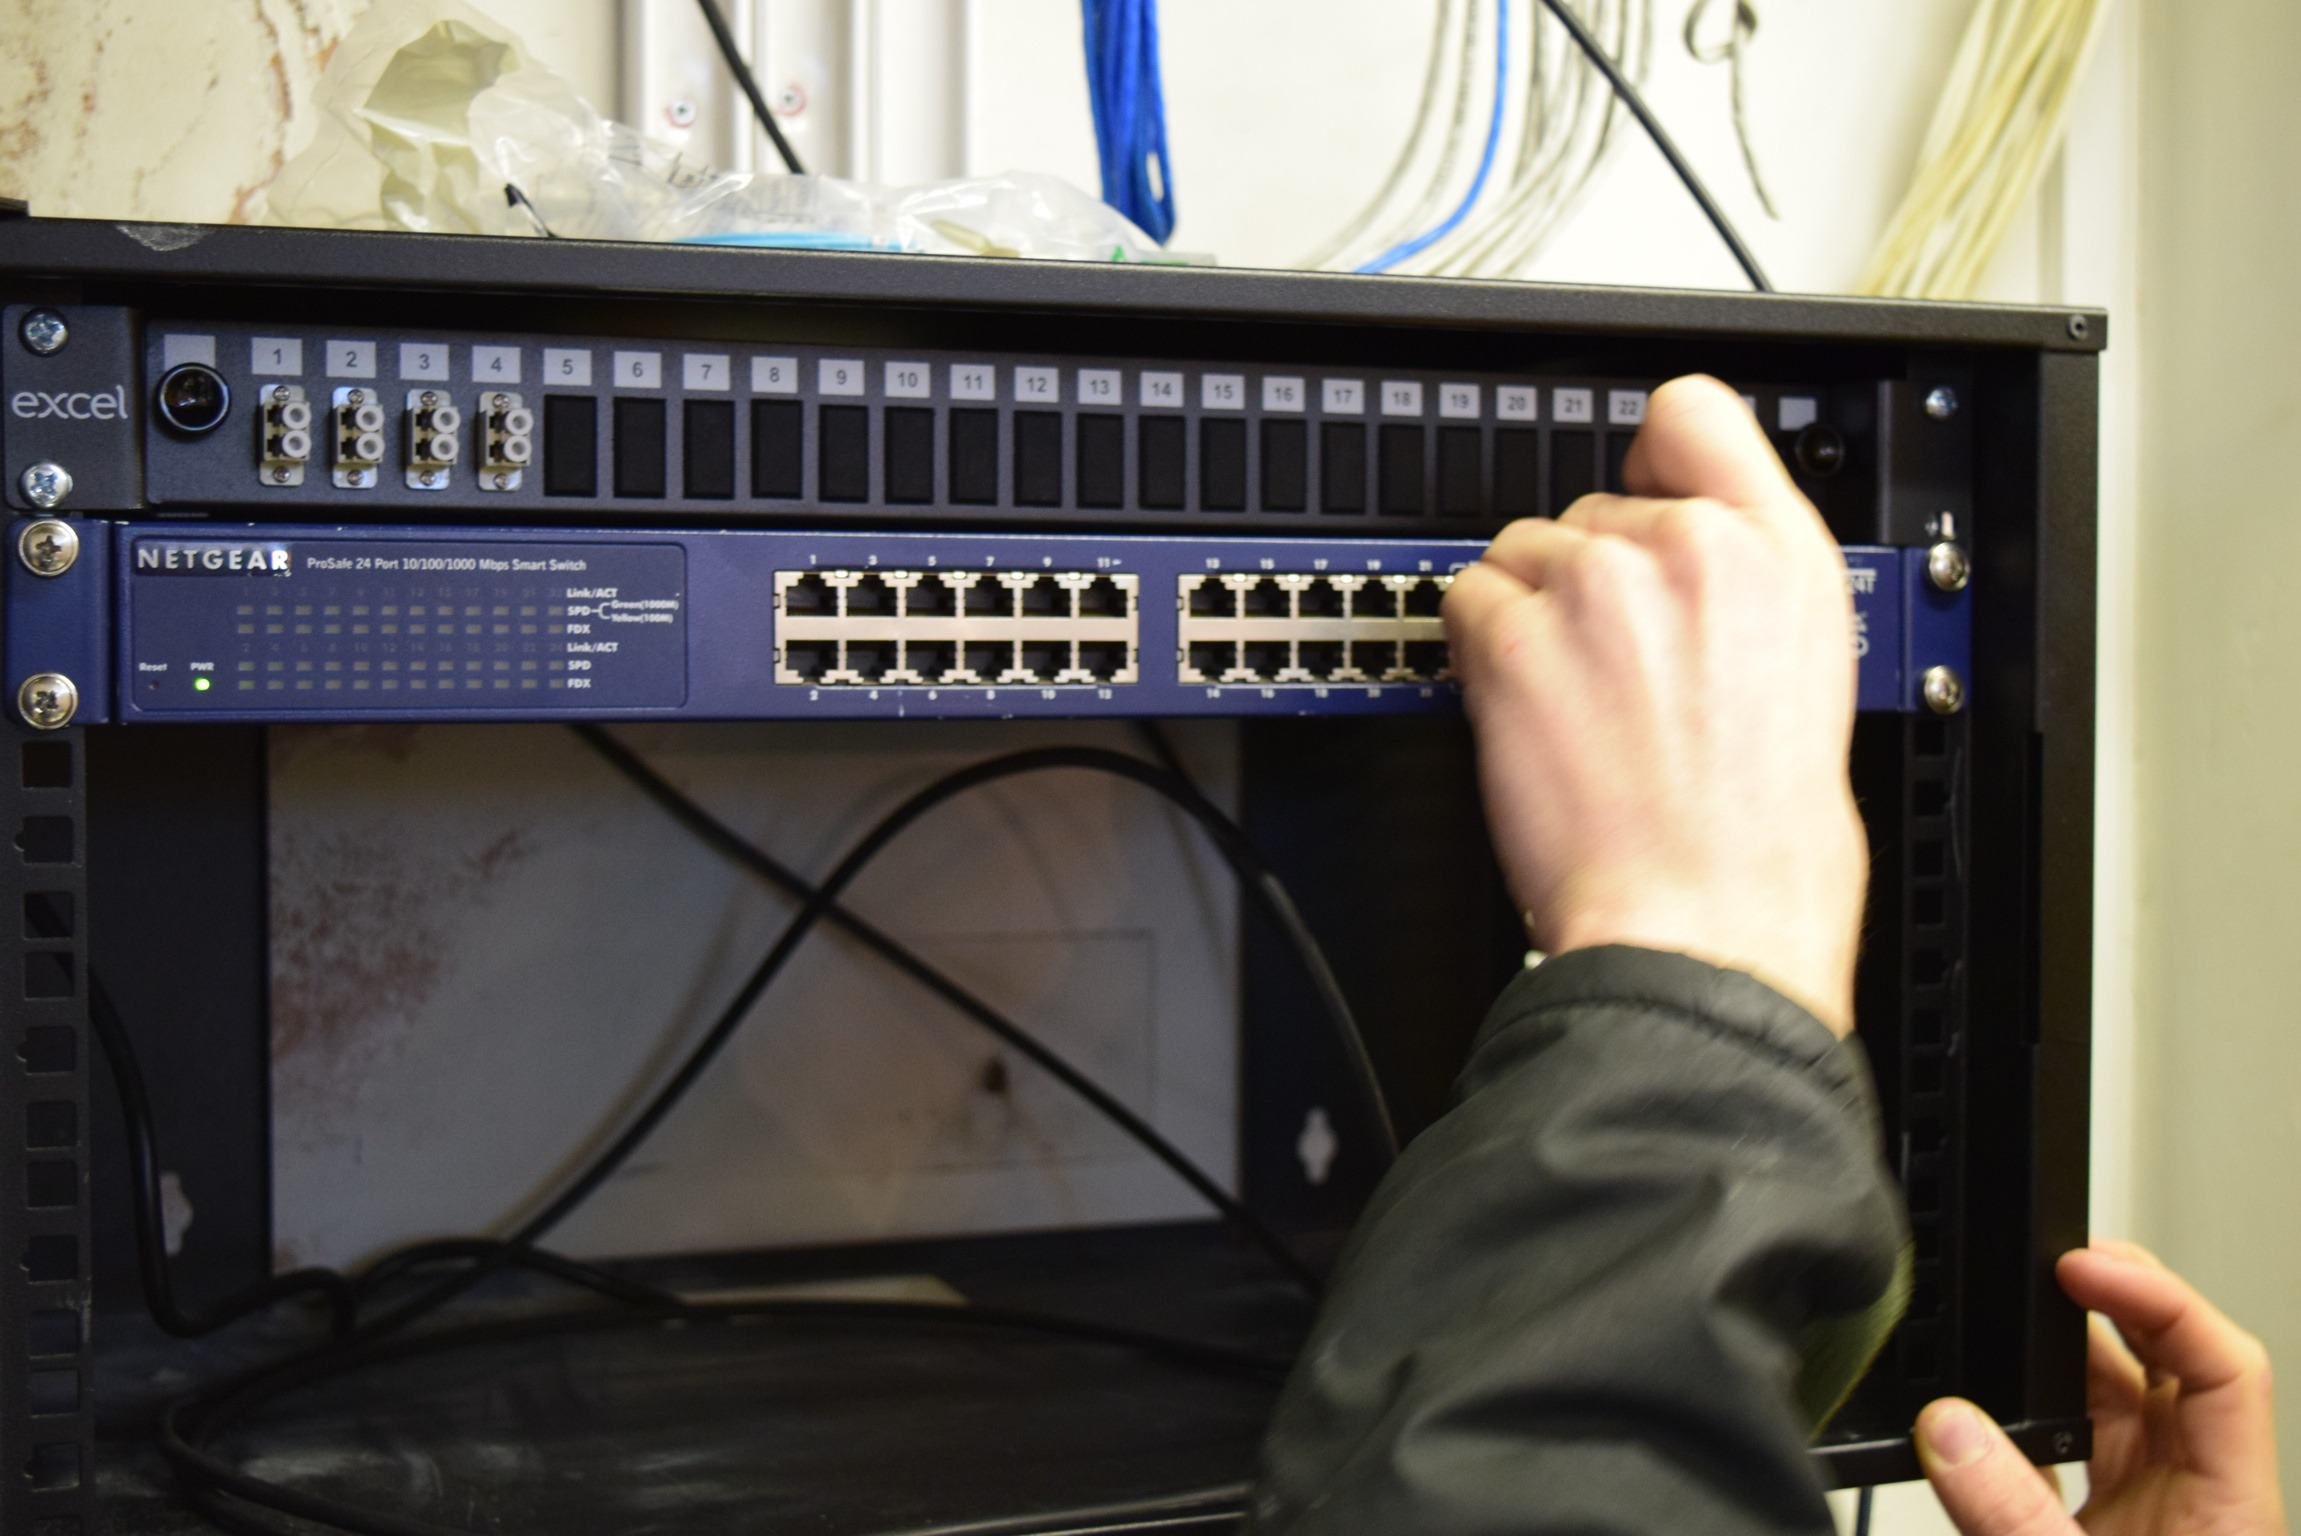 Engineer installing a gigabit data switch, demonstrating expertise and precision in setting up high-speed and efficient data networking equipment.